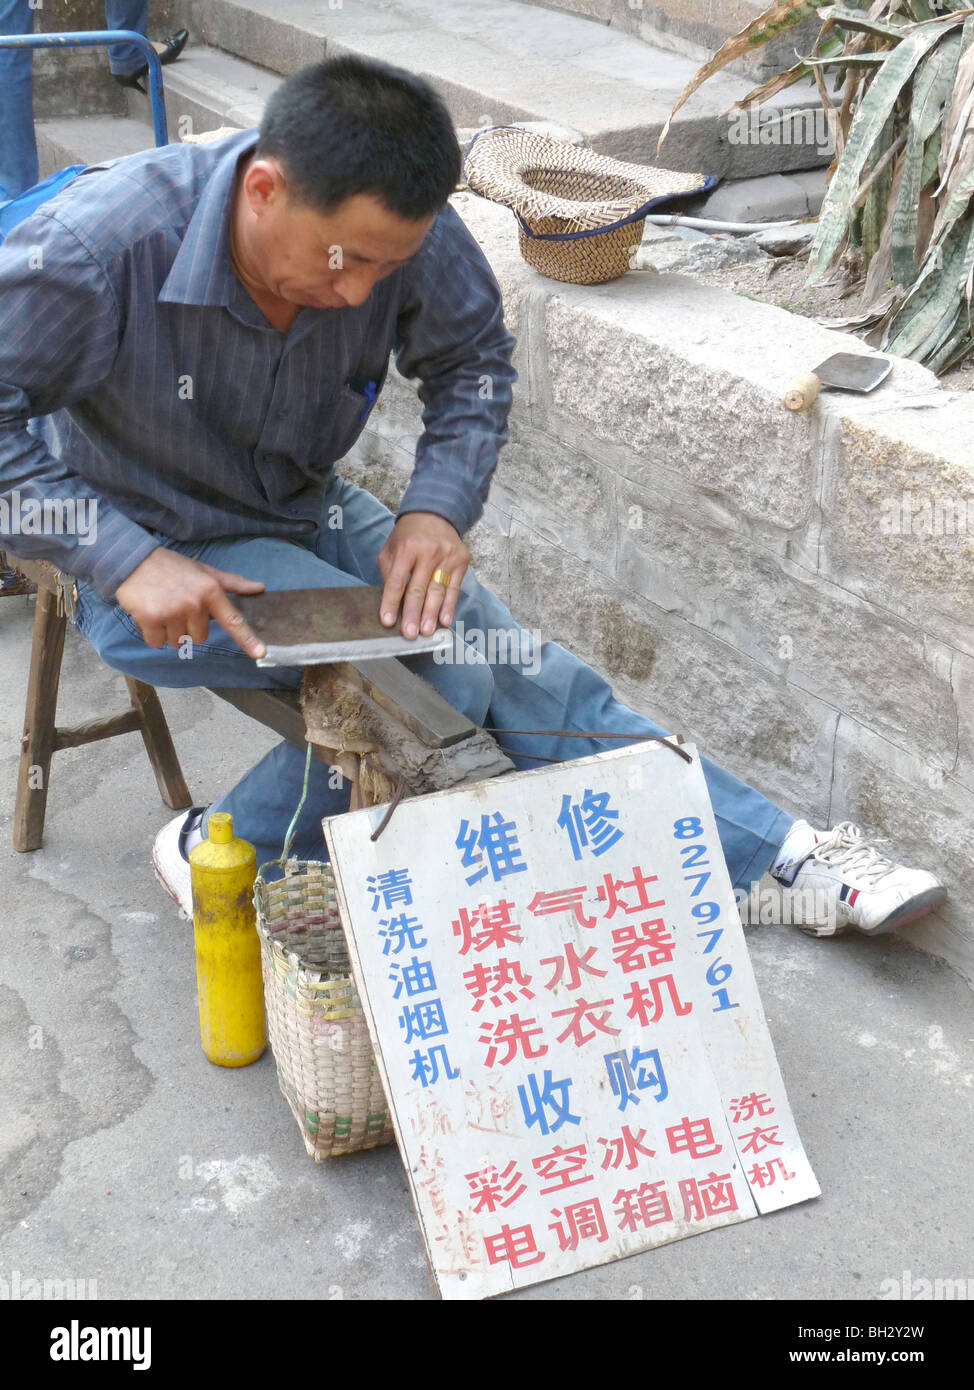 CHINA Migrant worker self-employed in Xiamen in Fujian province Photo by Julio Etchart Stock Photo